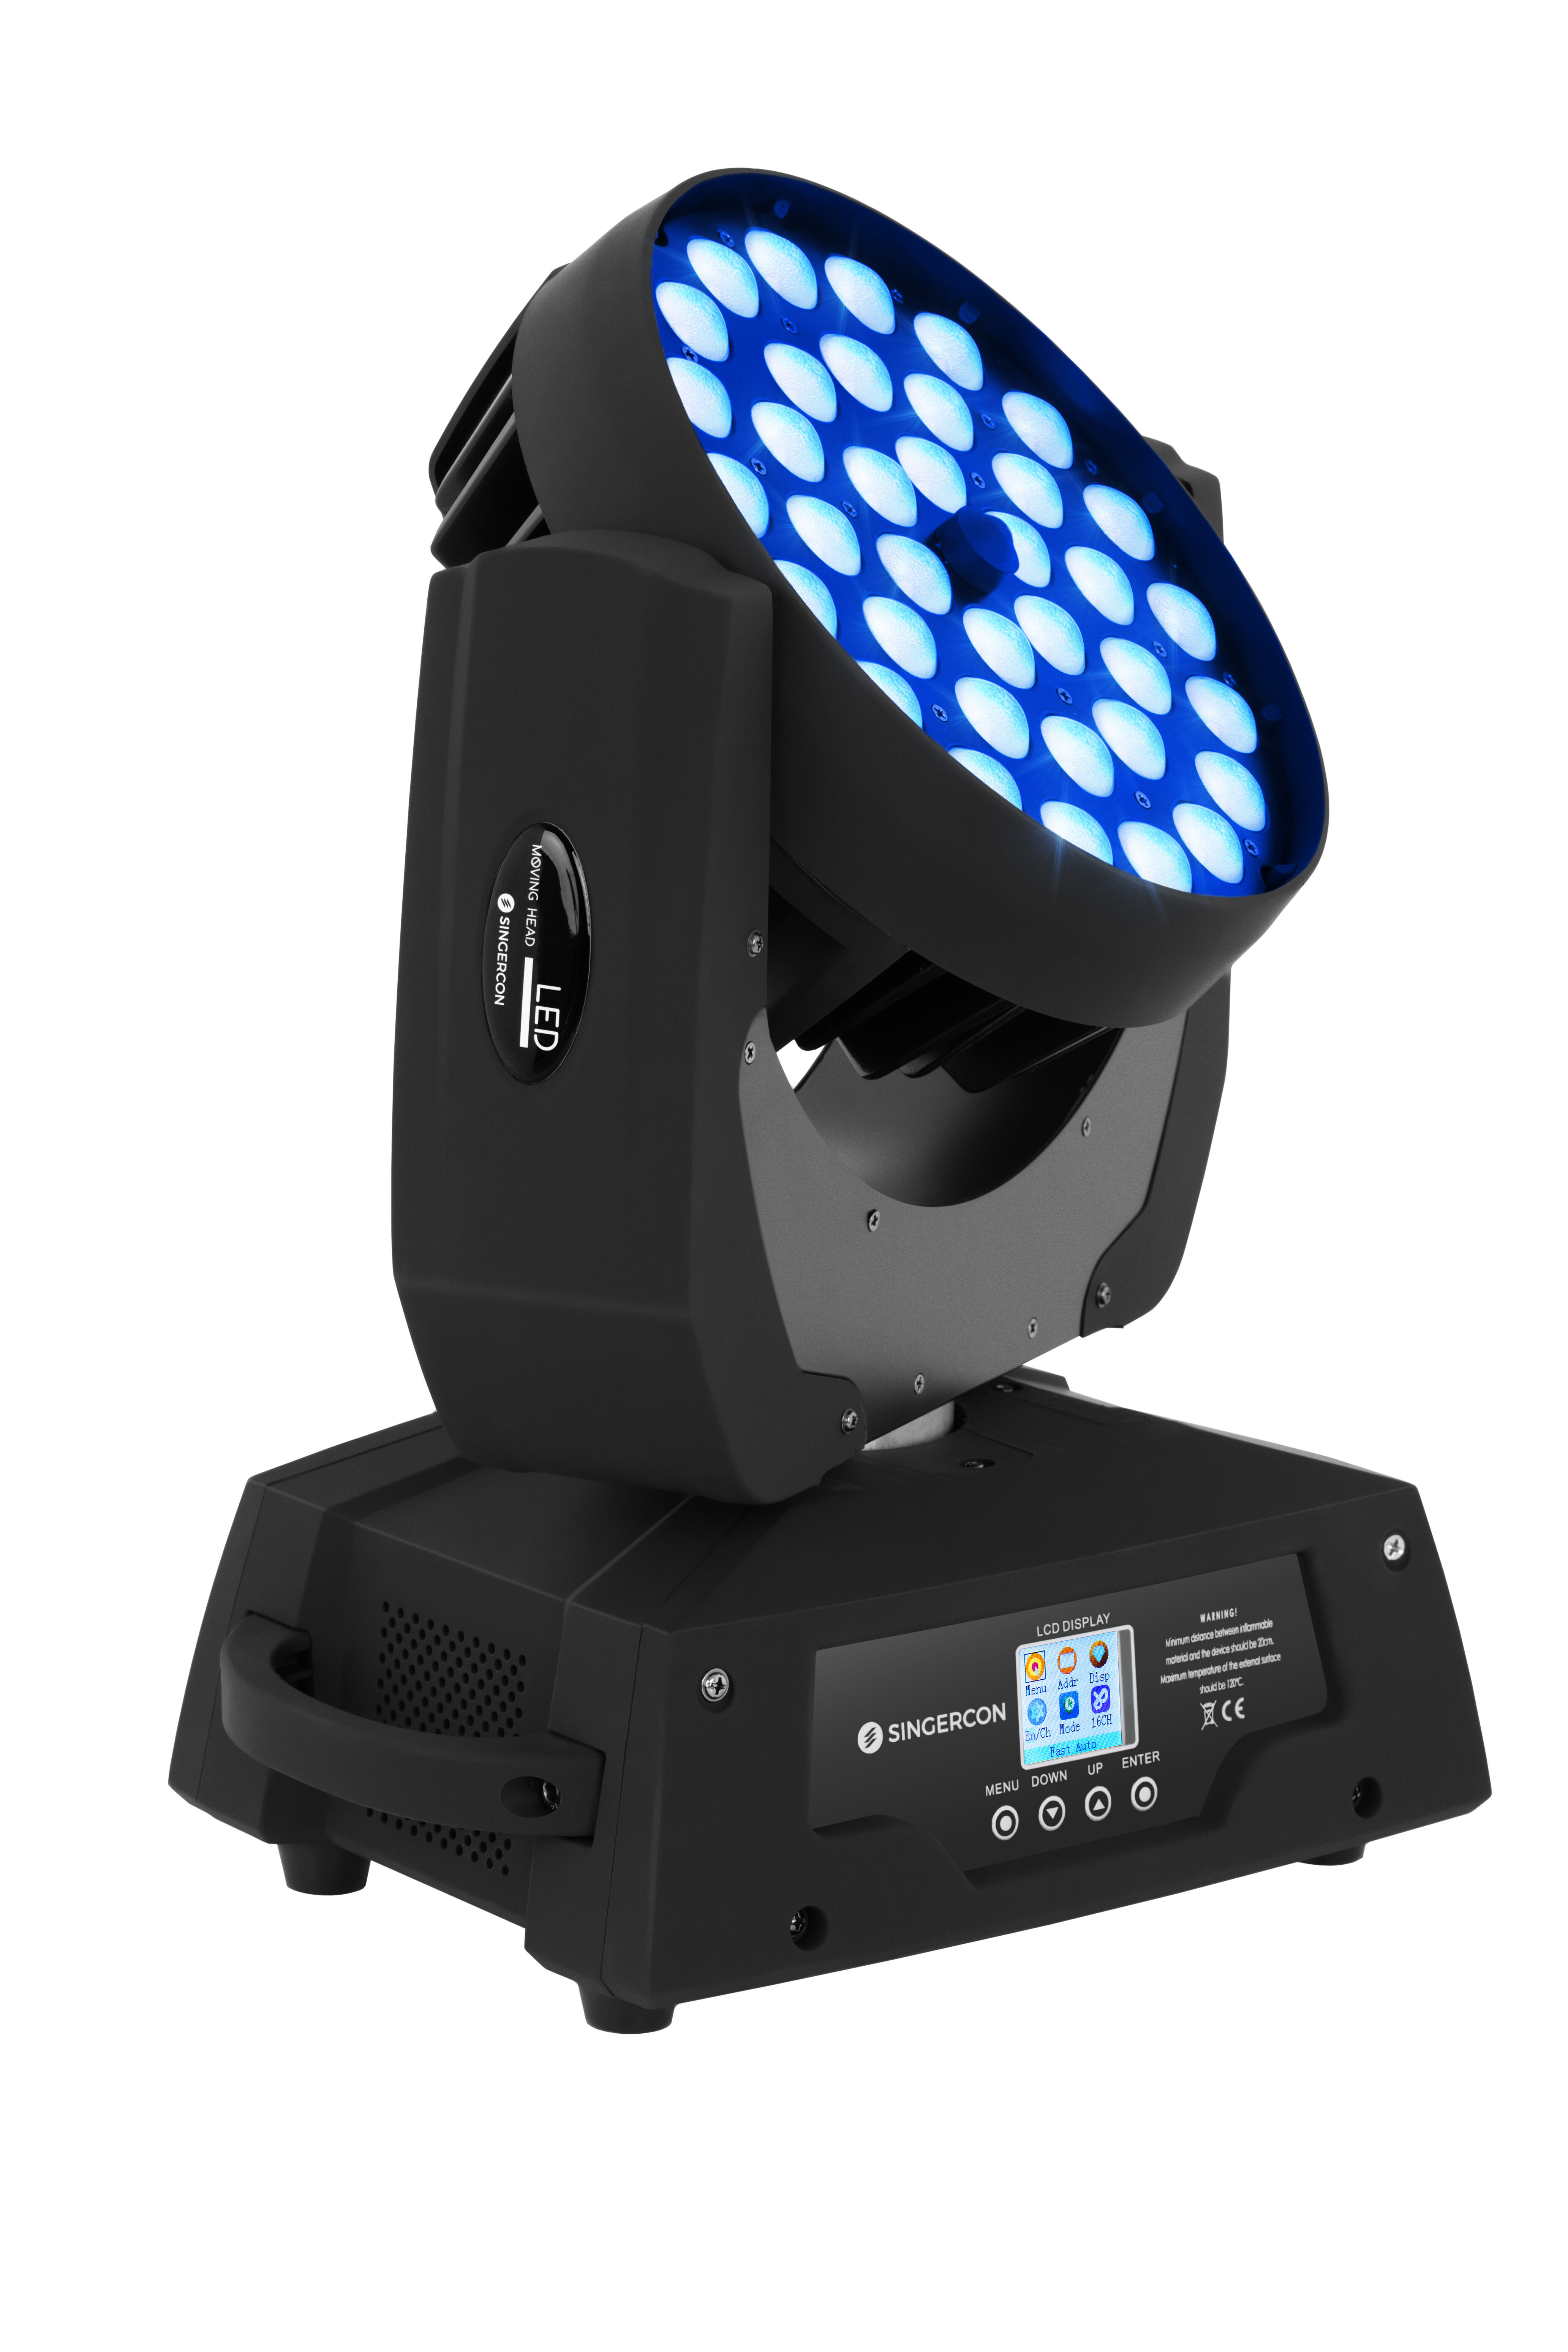 Singercon LED Moving Head Zoom - 36 LEDs - 450 W 10110228